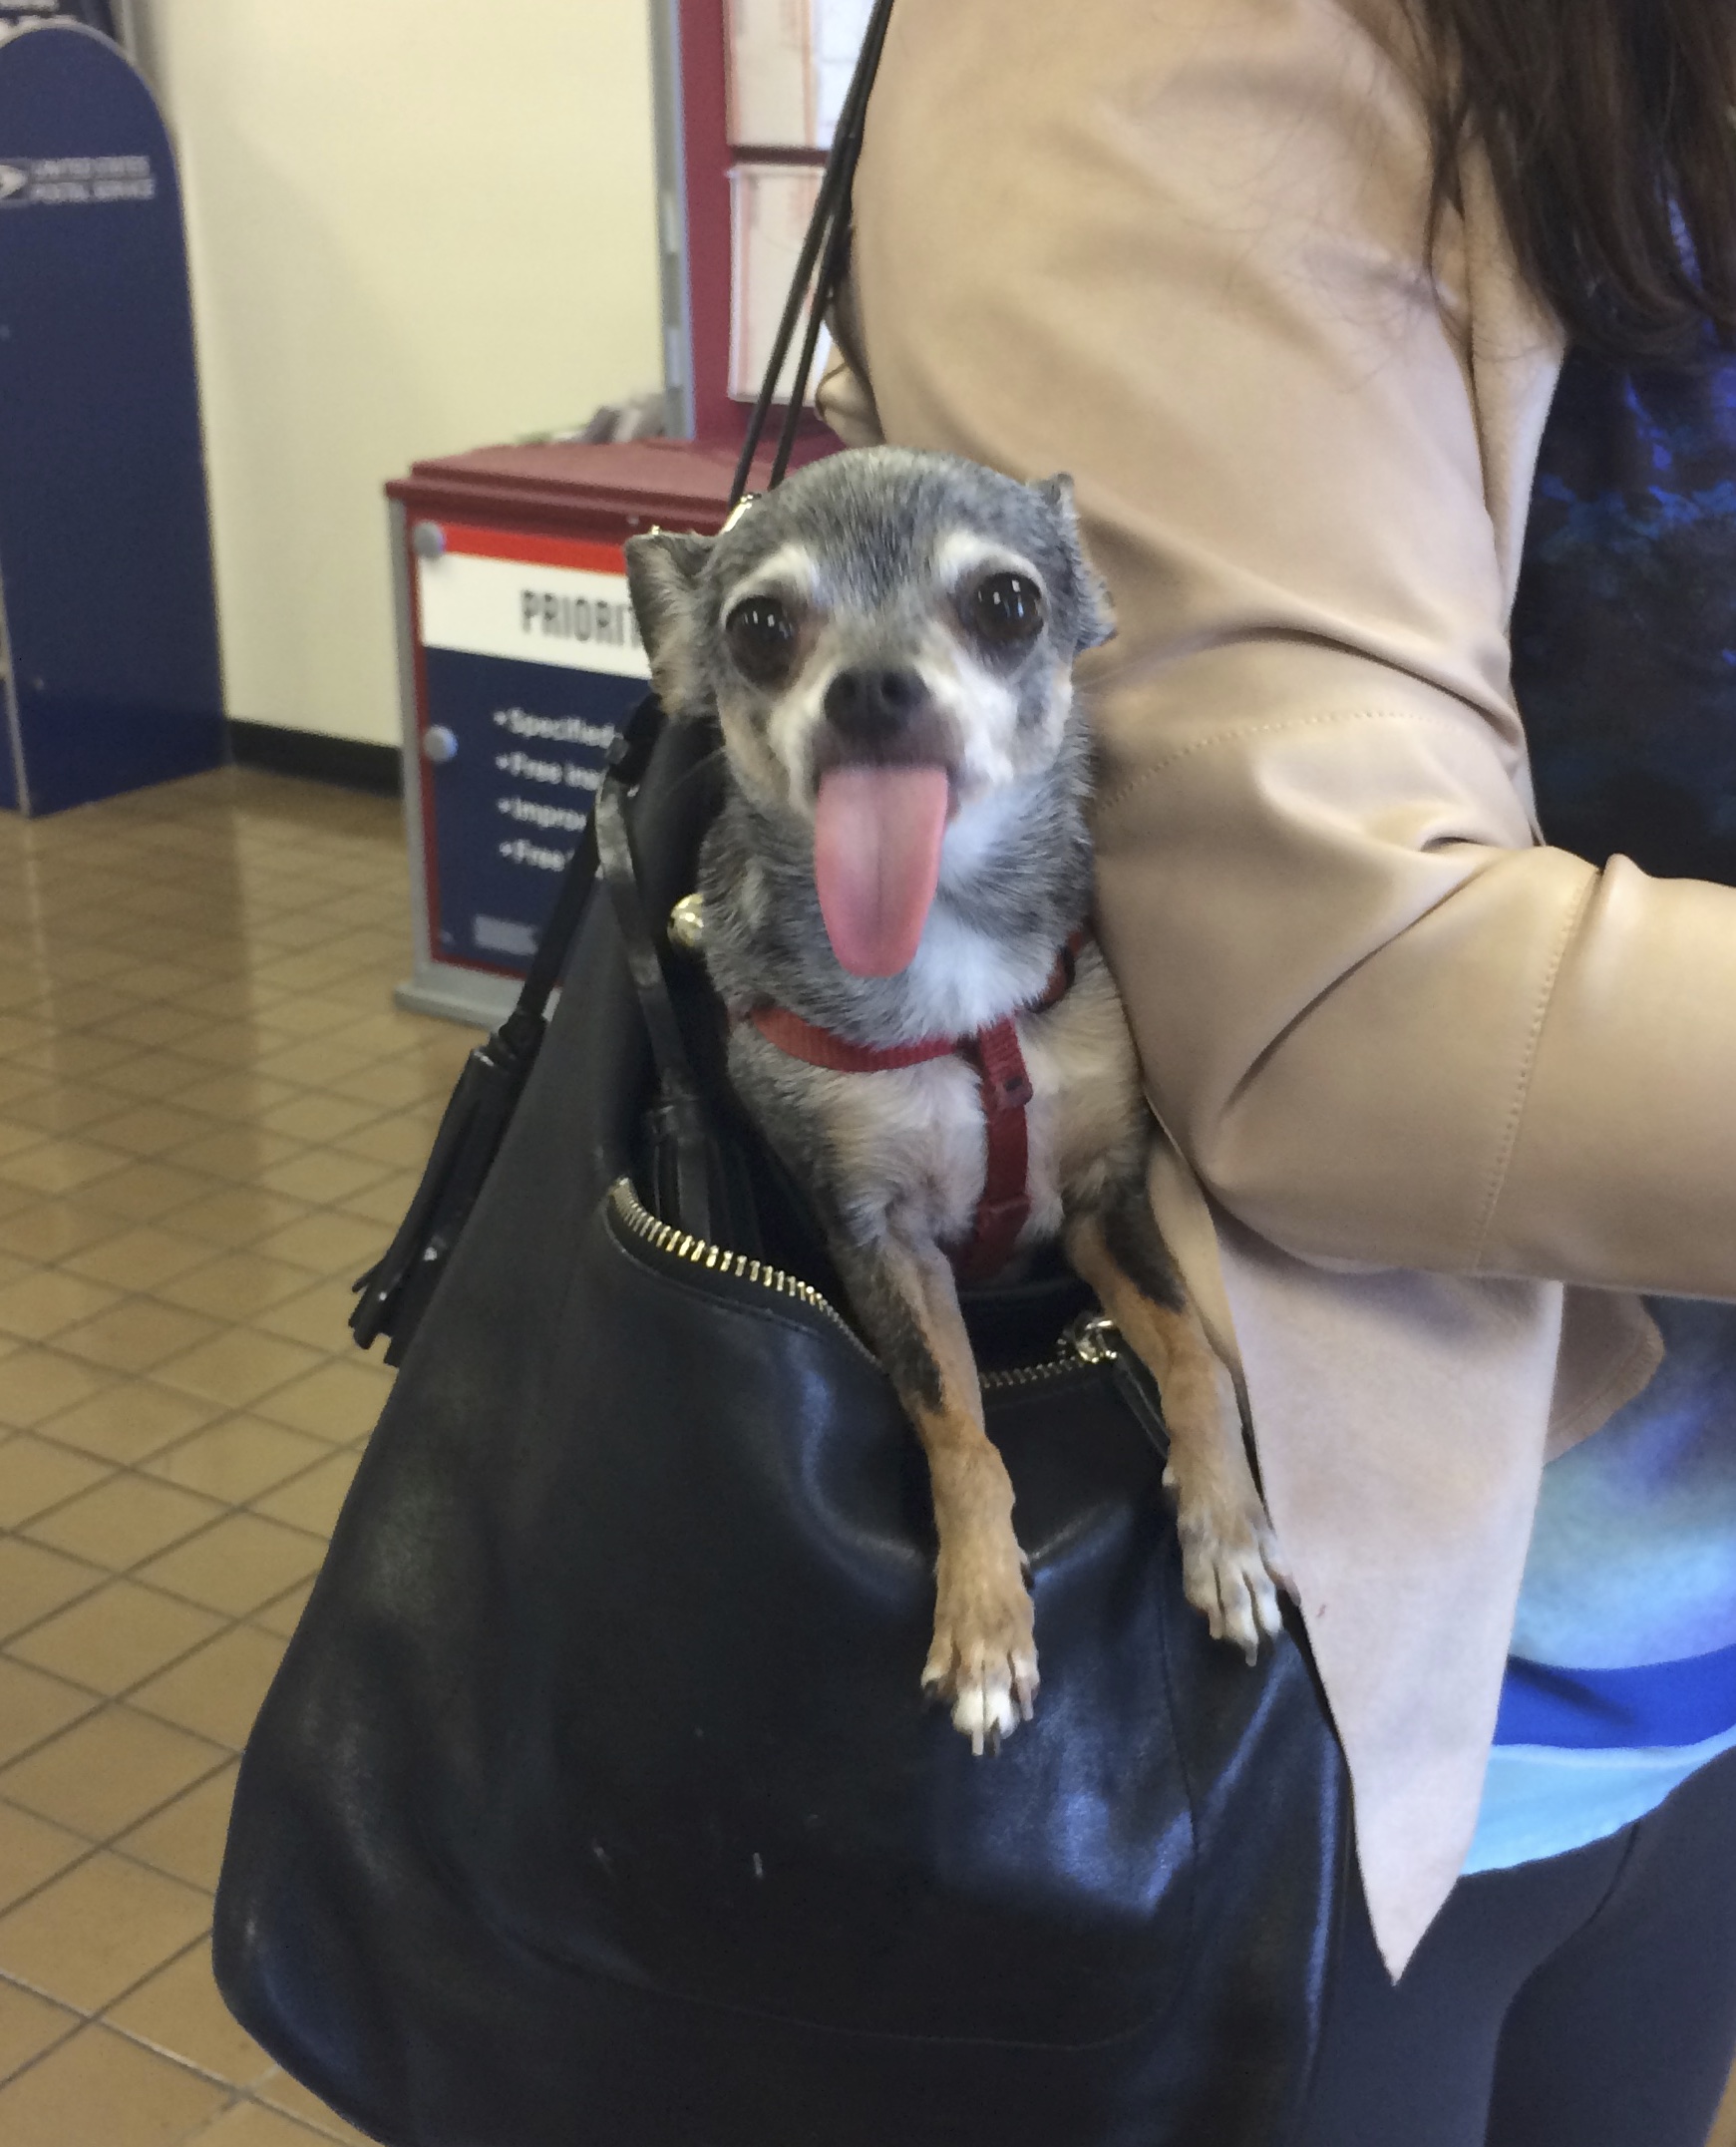 Derpy-Looking Chihuahua In A Leather Purse Sticking Out Her Tongue